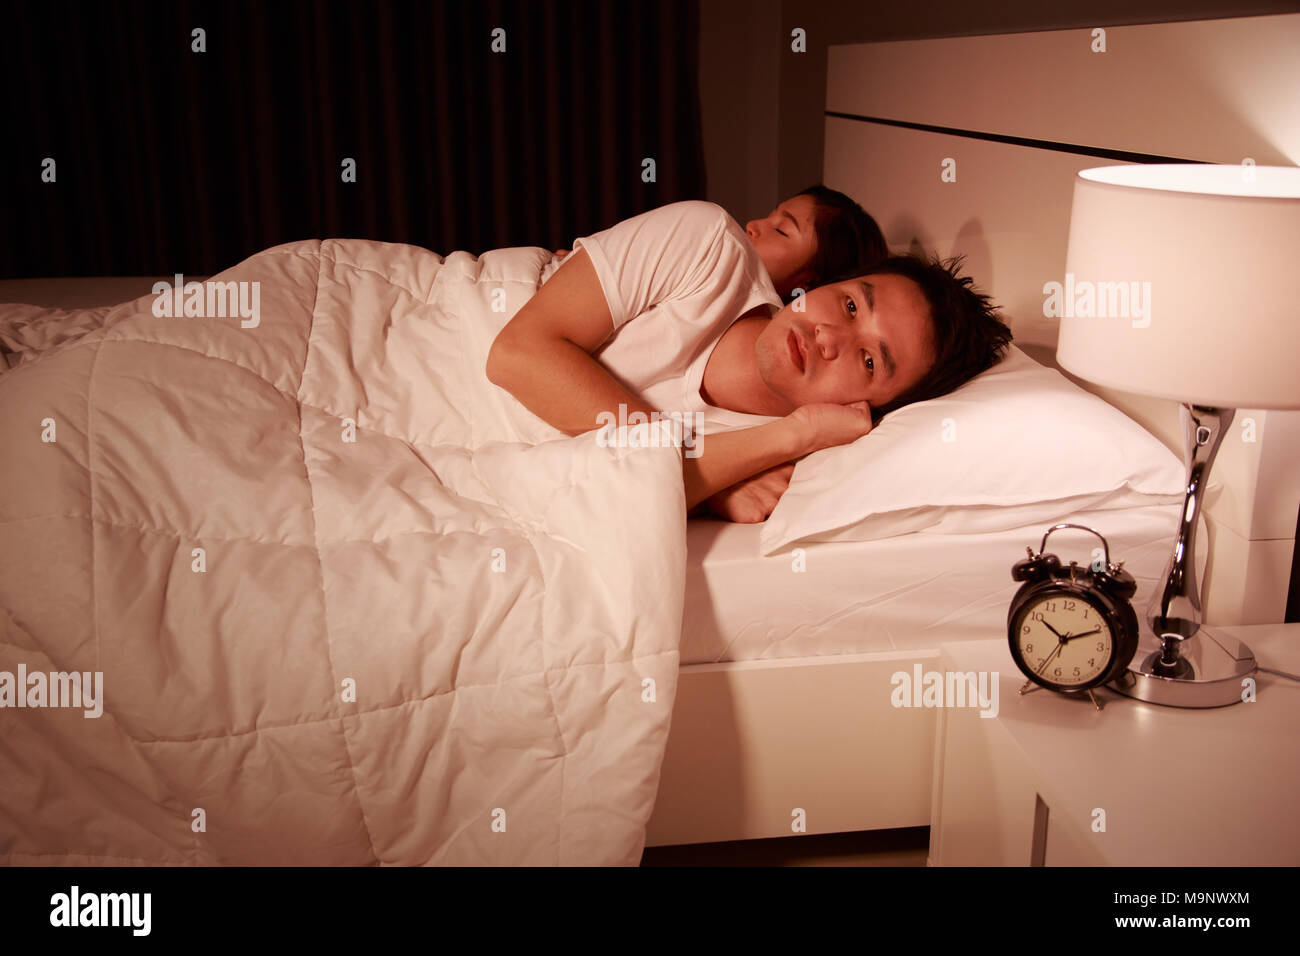 man having sleepless on bed and having migraine,stress, insomnia, hangover in the bedroom at night Stock Photo